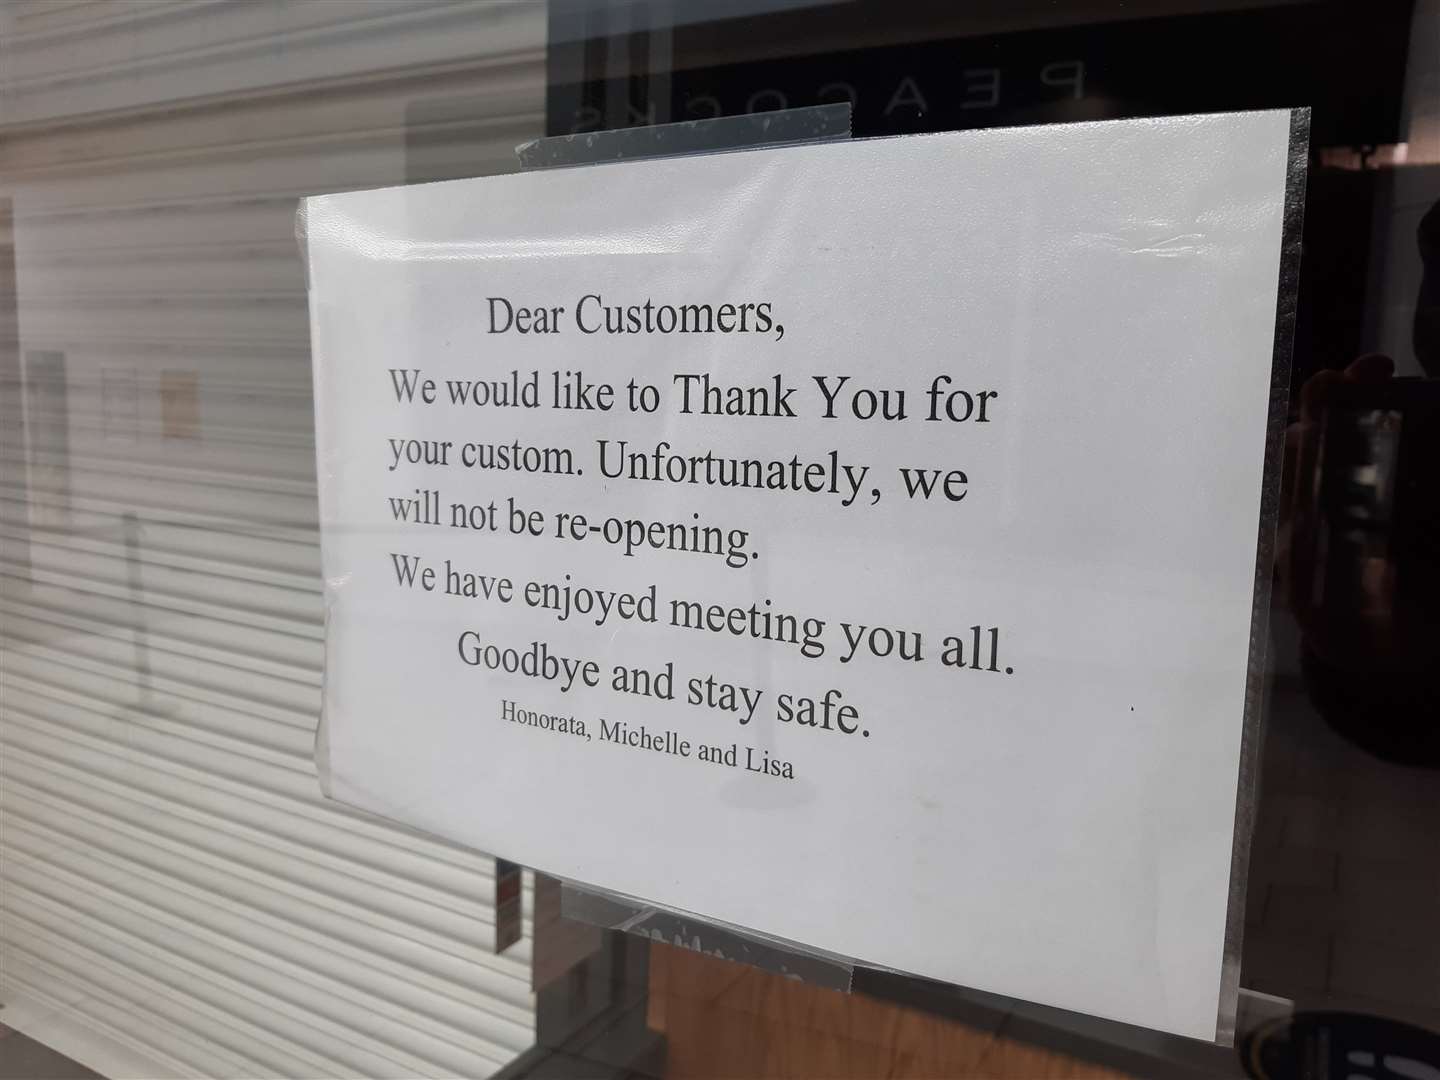 A farewell note on display at the Ashford store